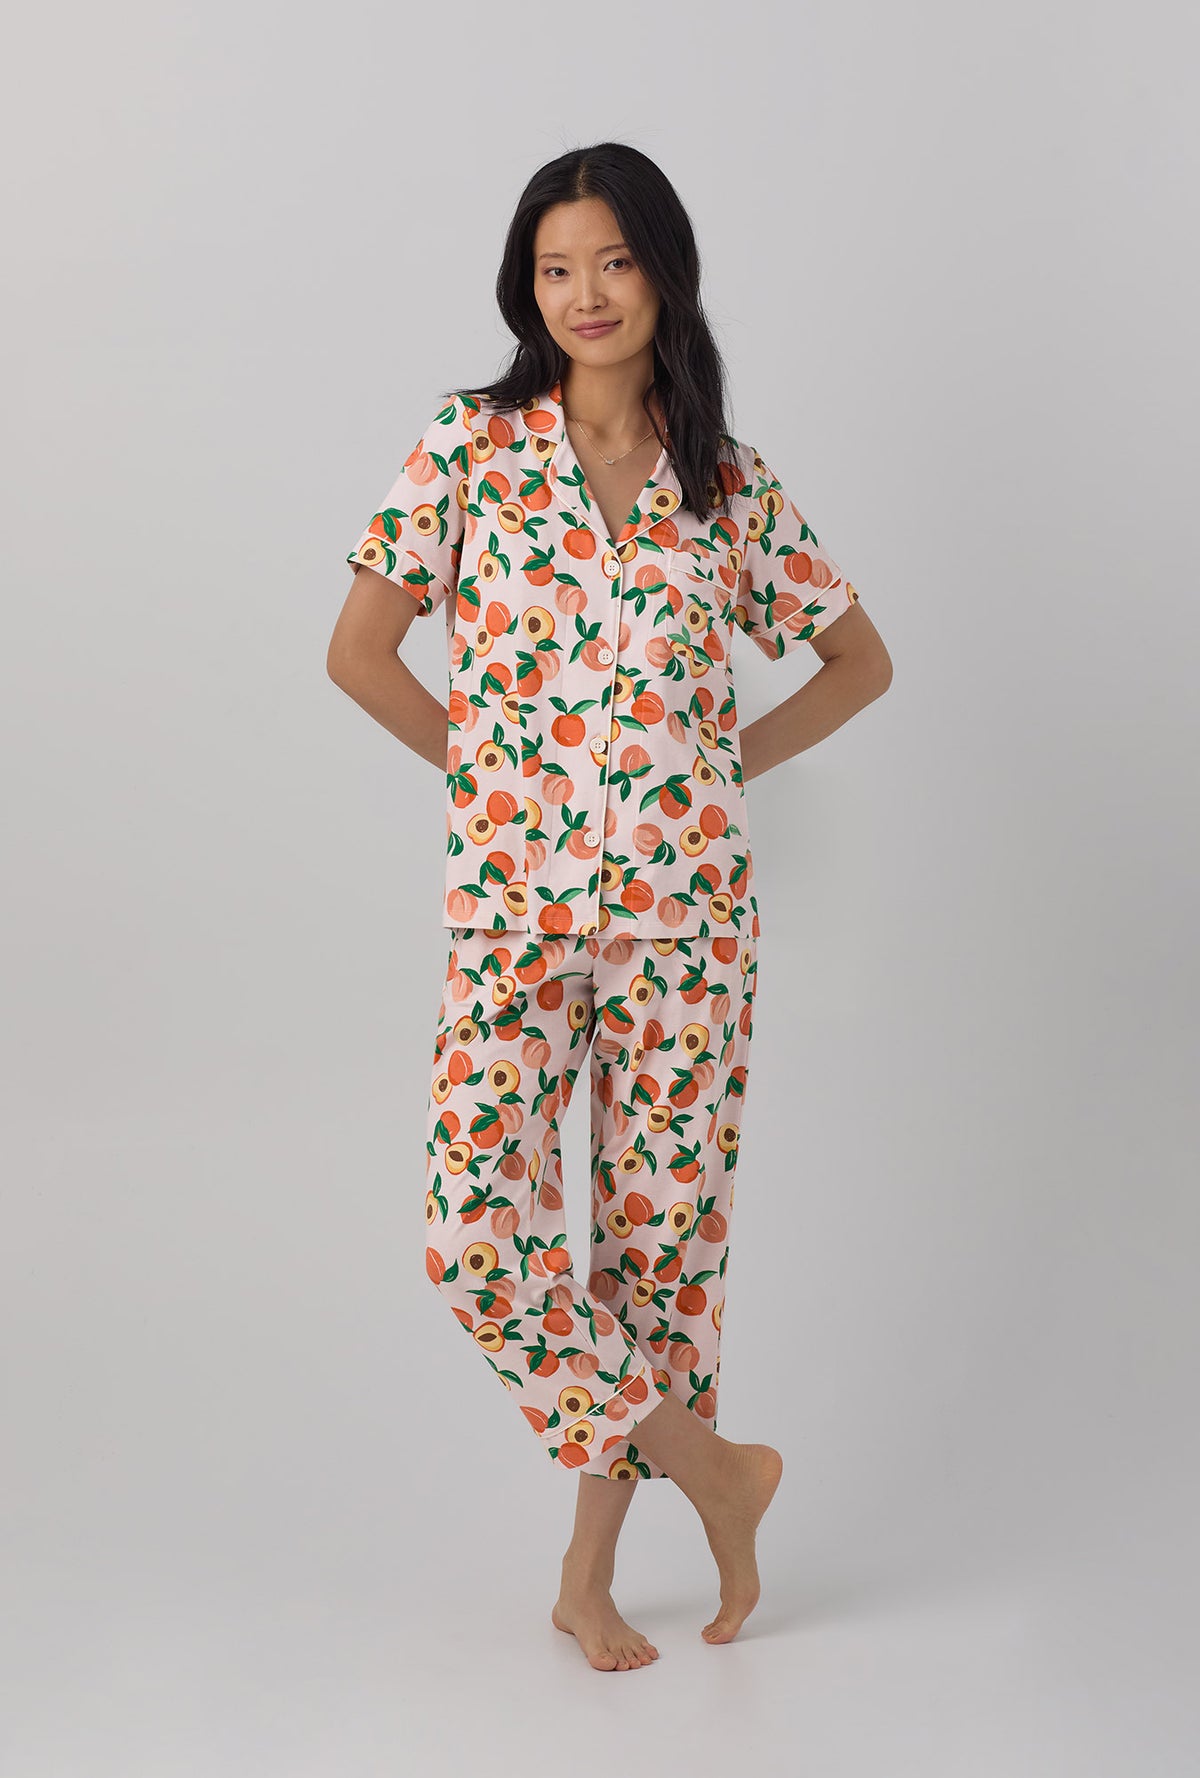 A lady wearing Short Sleeve Classic Stretch Jersey Cropped PJ Set with Peachy Keen print